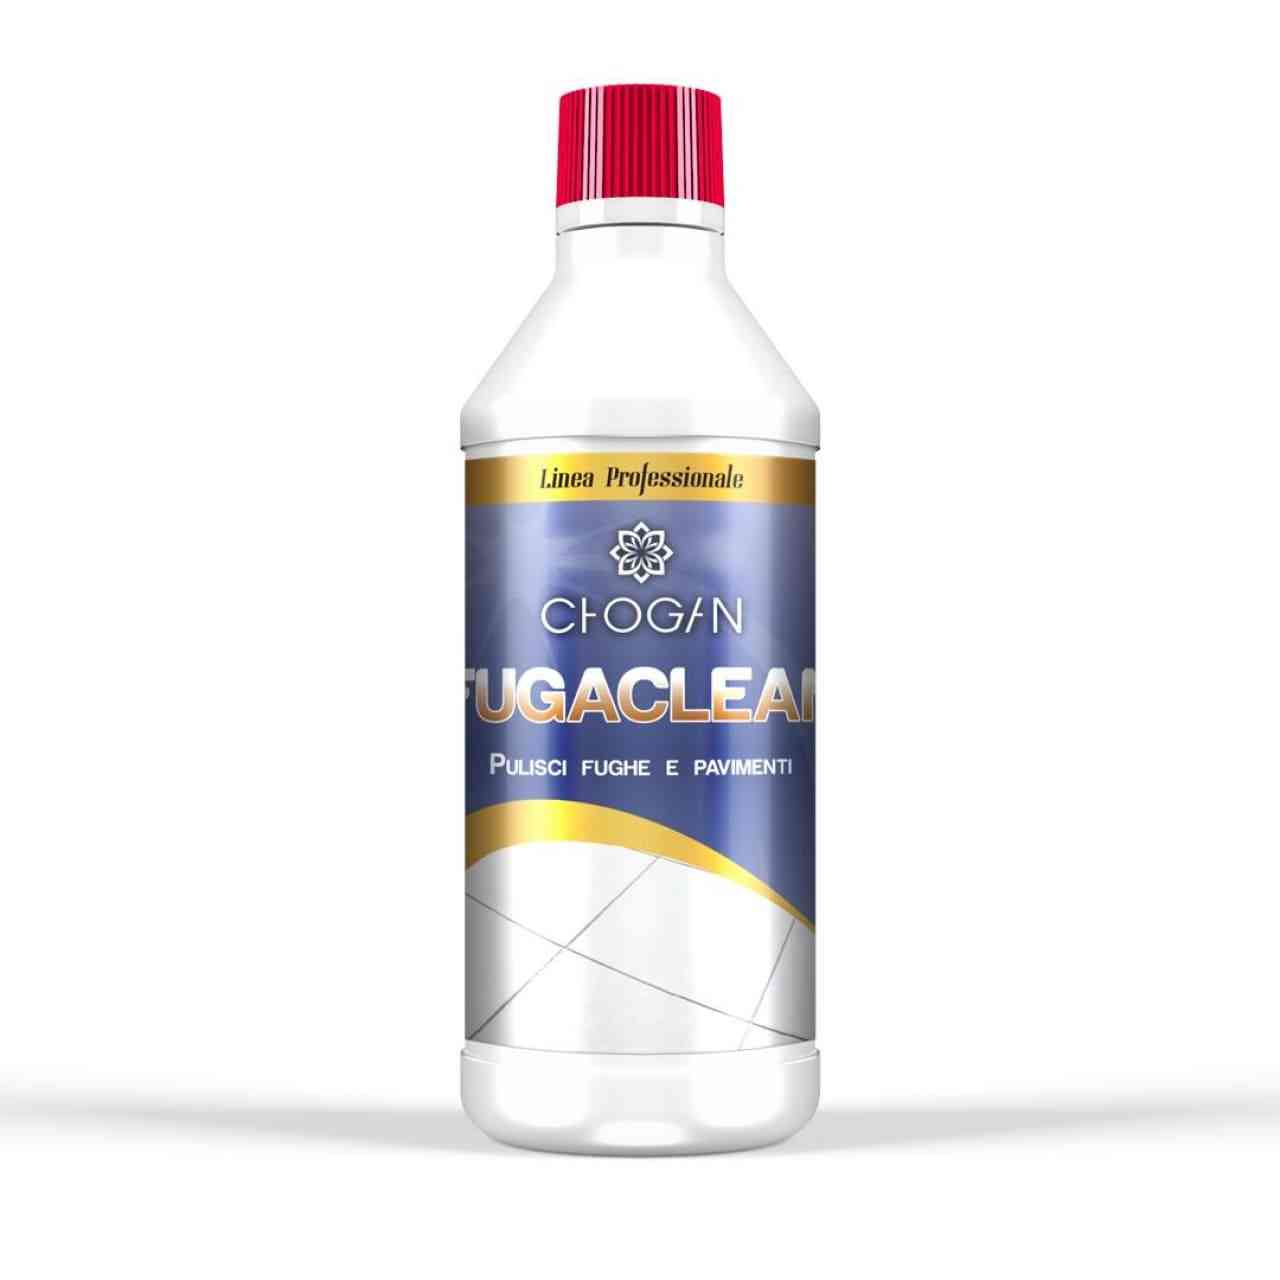 Fugaclean – Concentrated grout cleaner